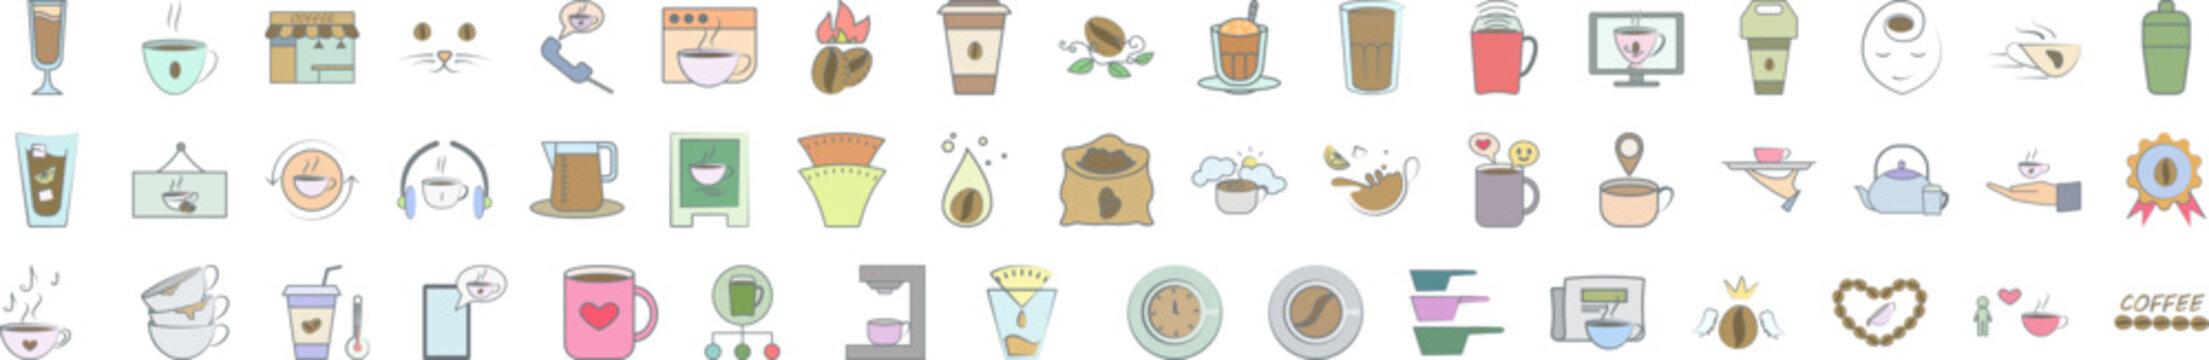 Coffee icon collections vector design